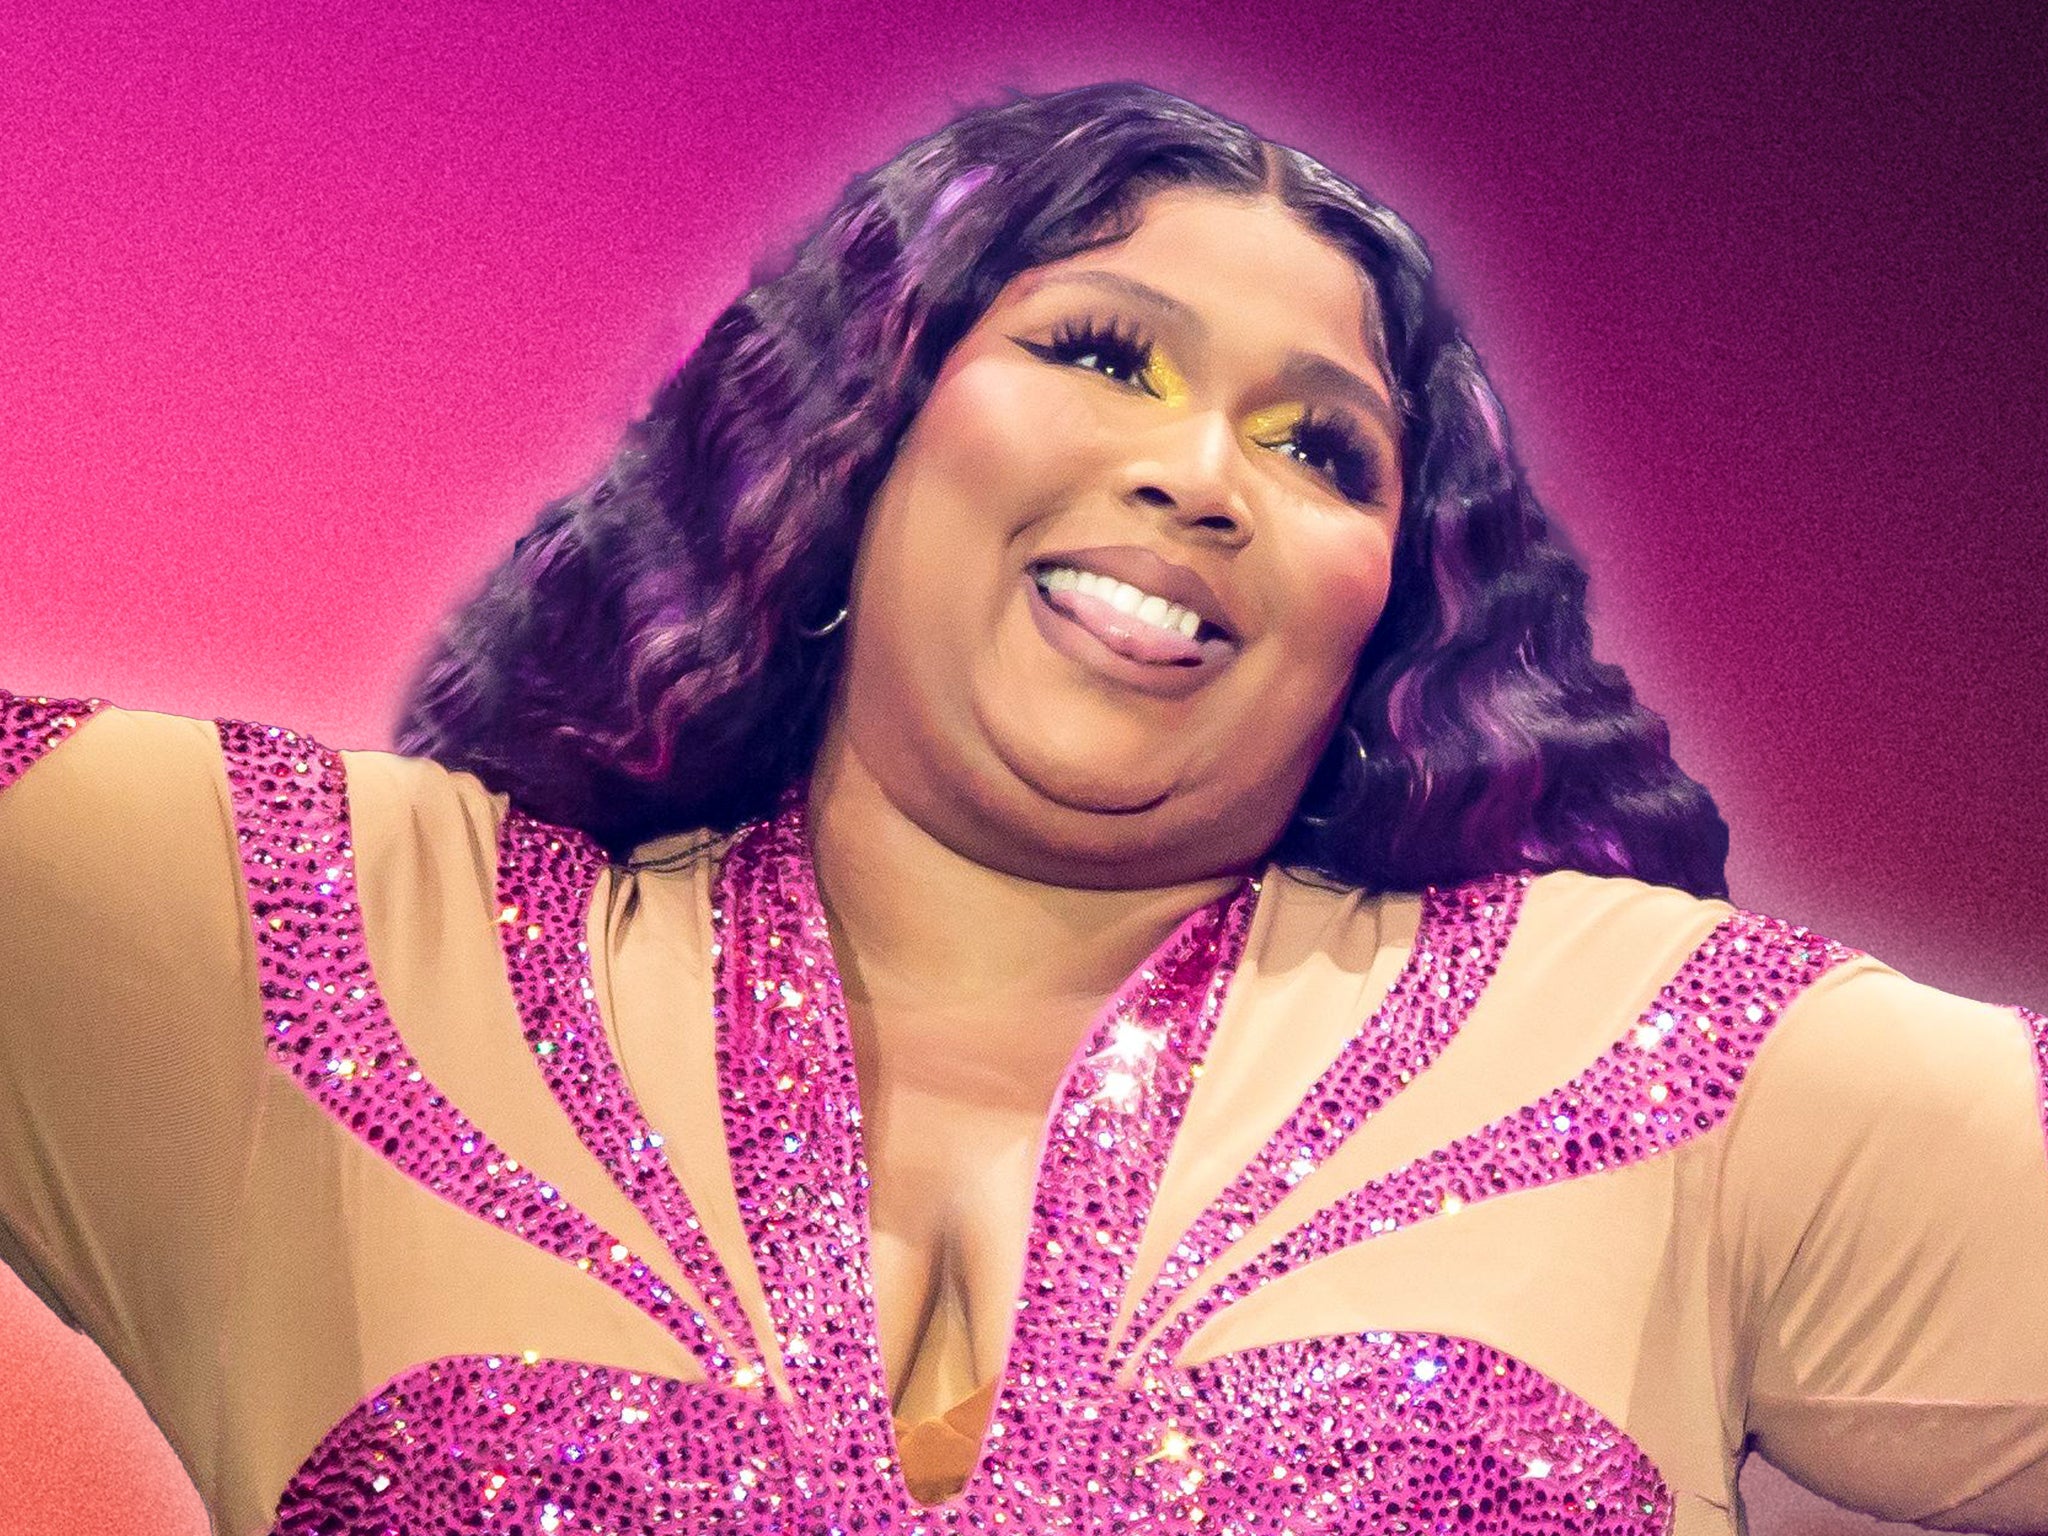 Lizzo lawsuit and allegations The poster girl for body positivity, whose empowering image is now under threat The Independent photo pic